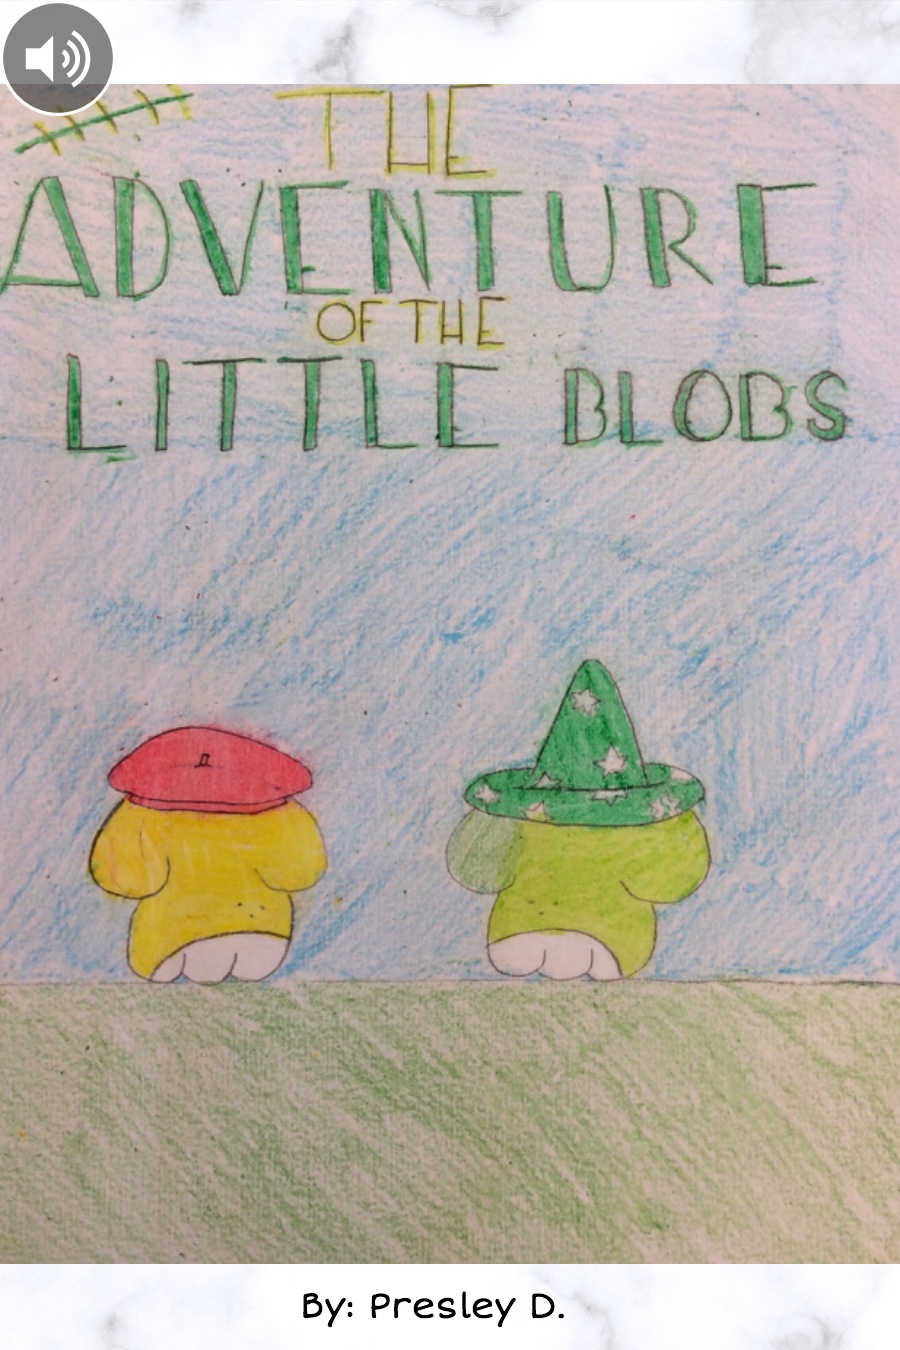 The Adventure of the Little Blobs By Presley D